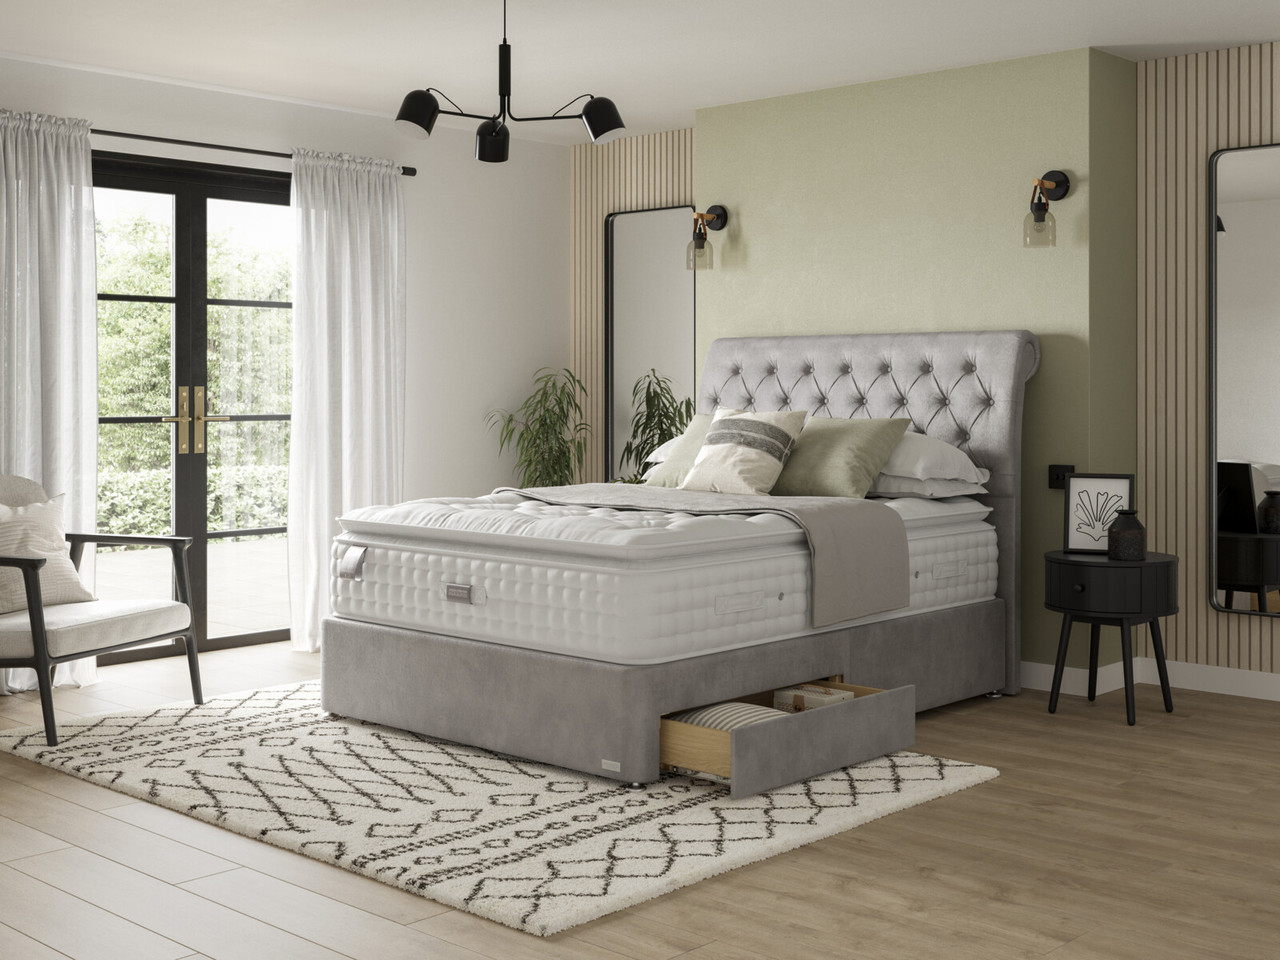 Staples And Co Artisan Deluxe Divan Bed Set On Glides Double London Tan